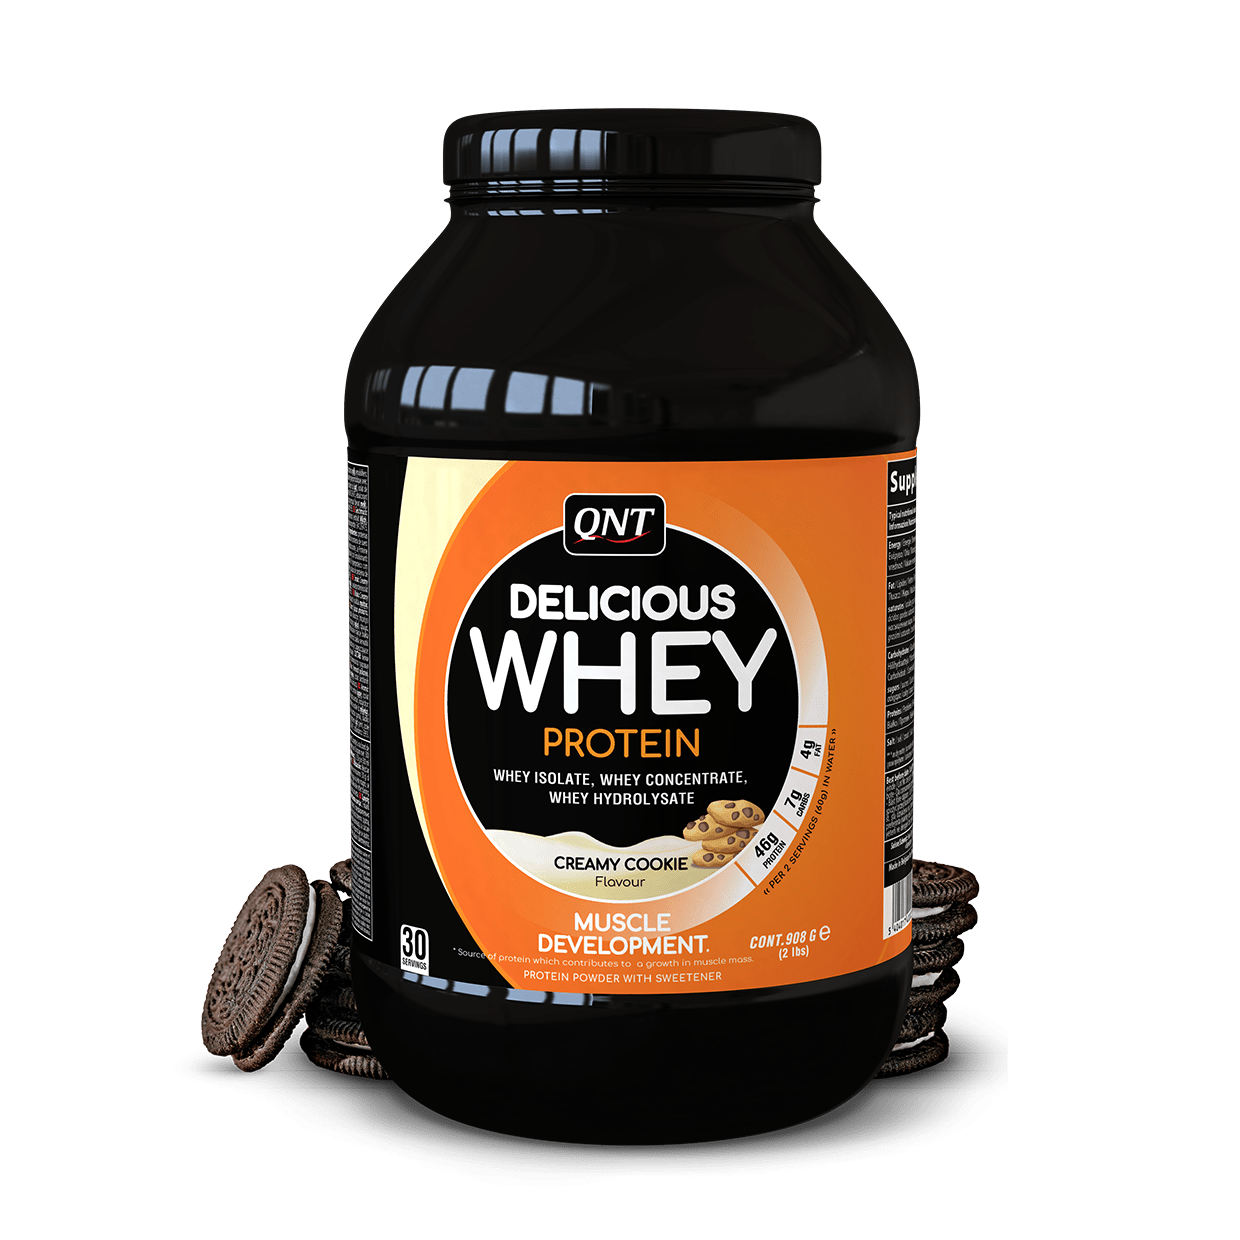 Сывороточный протеин изолят QNT Delicious Whey protein (908 г)кюнт  cookies & cream,  ml, QNT. Whey Isolate. Lean muscle mass Weight Loss recovery Anti-catabolic properties 